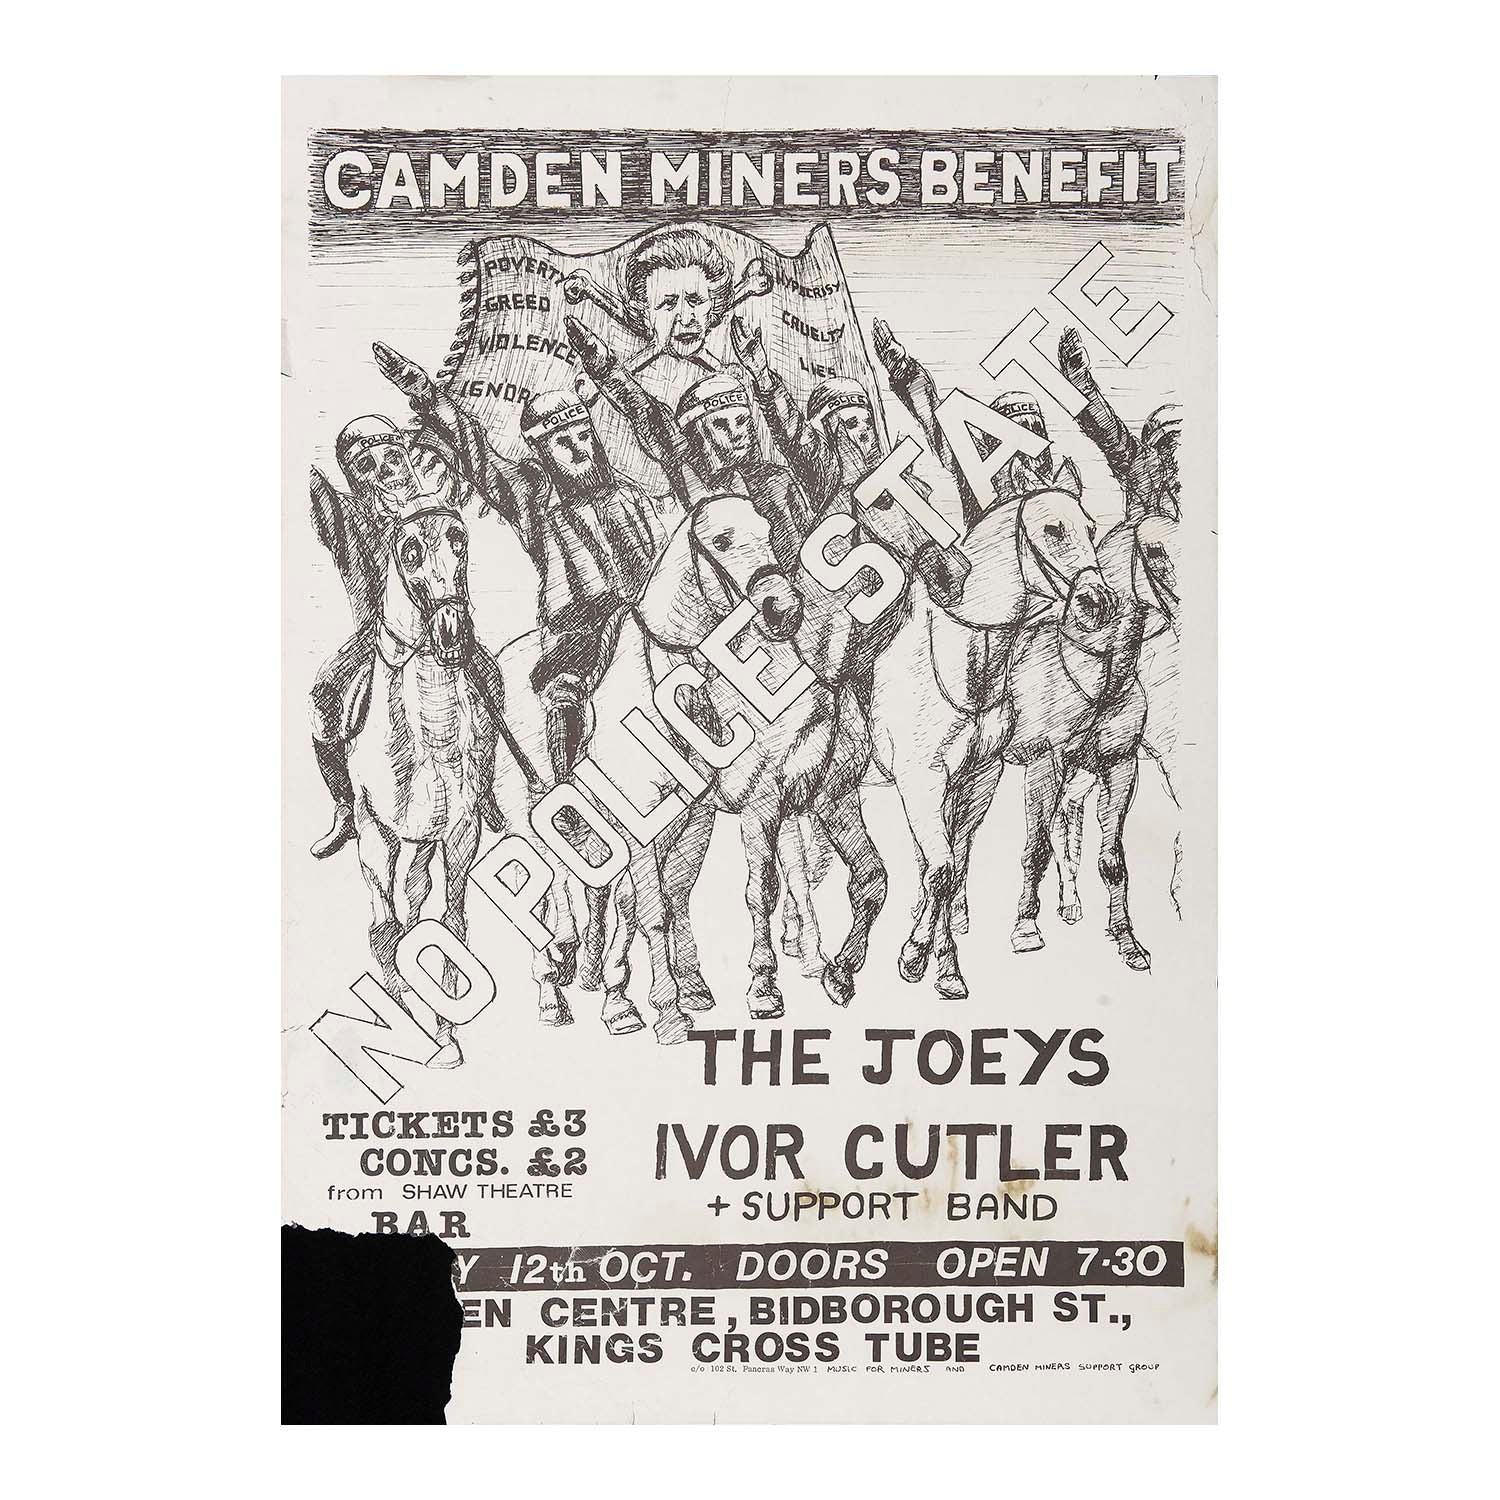 Camden Miners Benefit gig poster, 1984. Depicts riot-gear wearing mounted police giving the Nazi salute beneath a flag of Prime Minister Margaret Thatcher in piratical mode, under the slogan No Police State